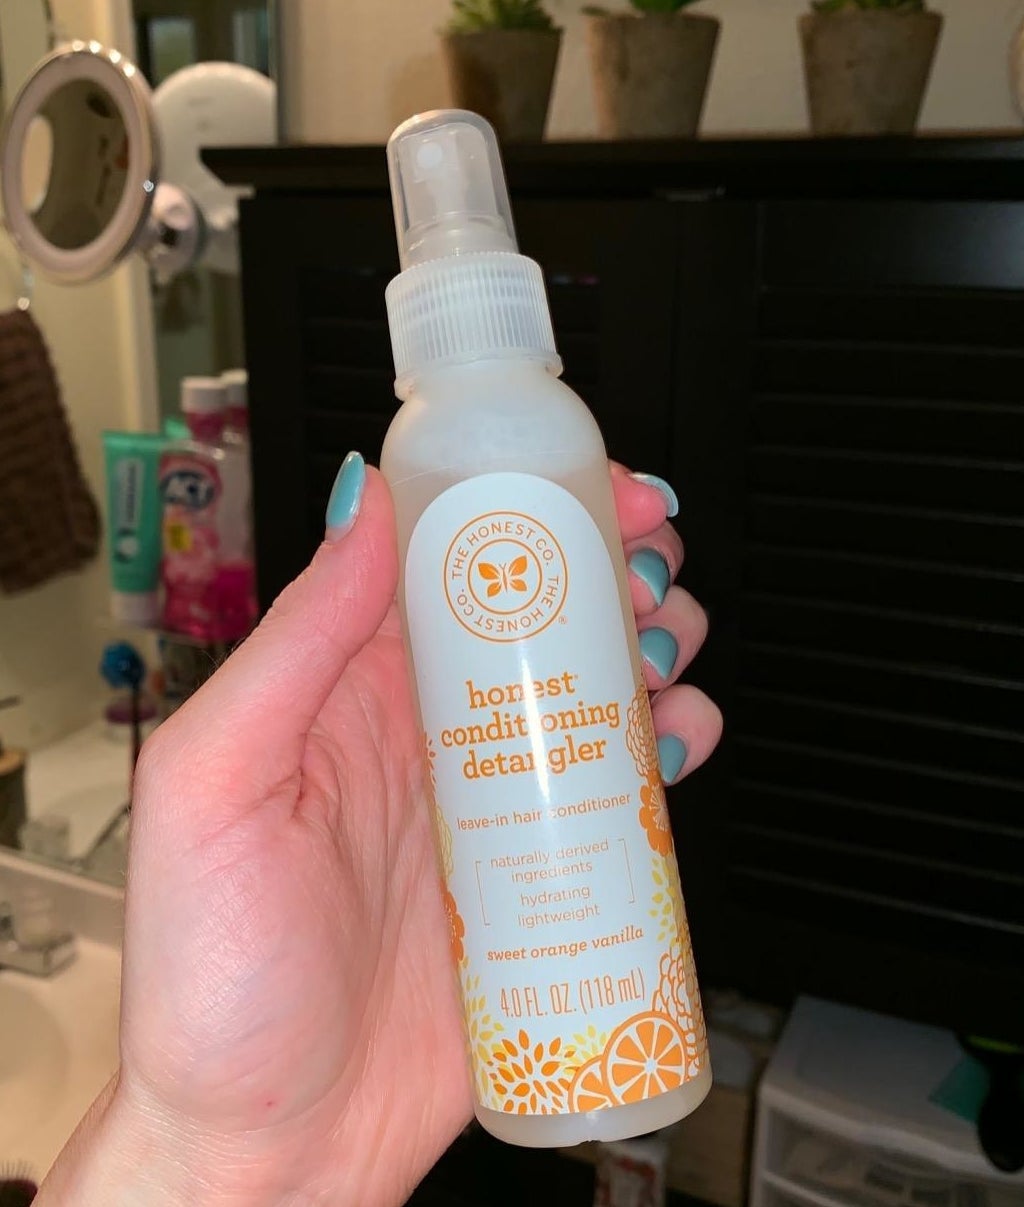 A hand holding the detangler spray bottle, which is about the size of a body spray or face mist 